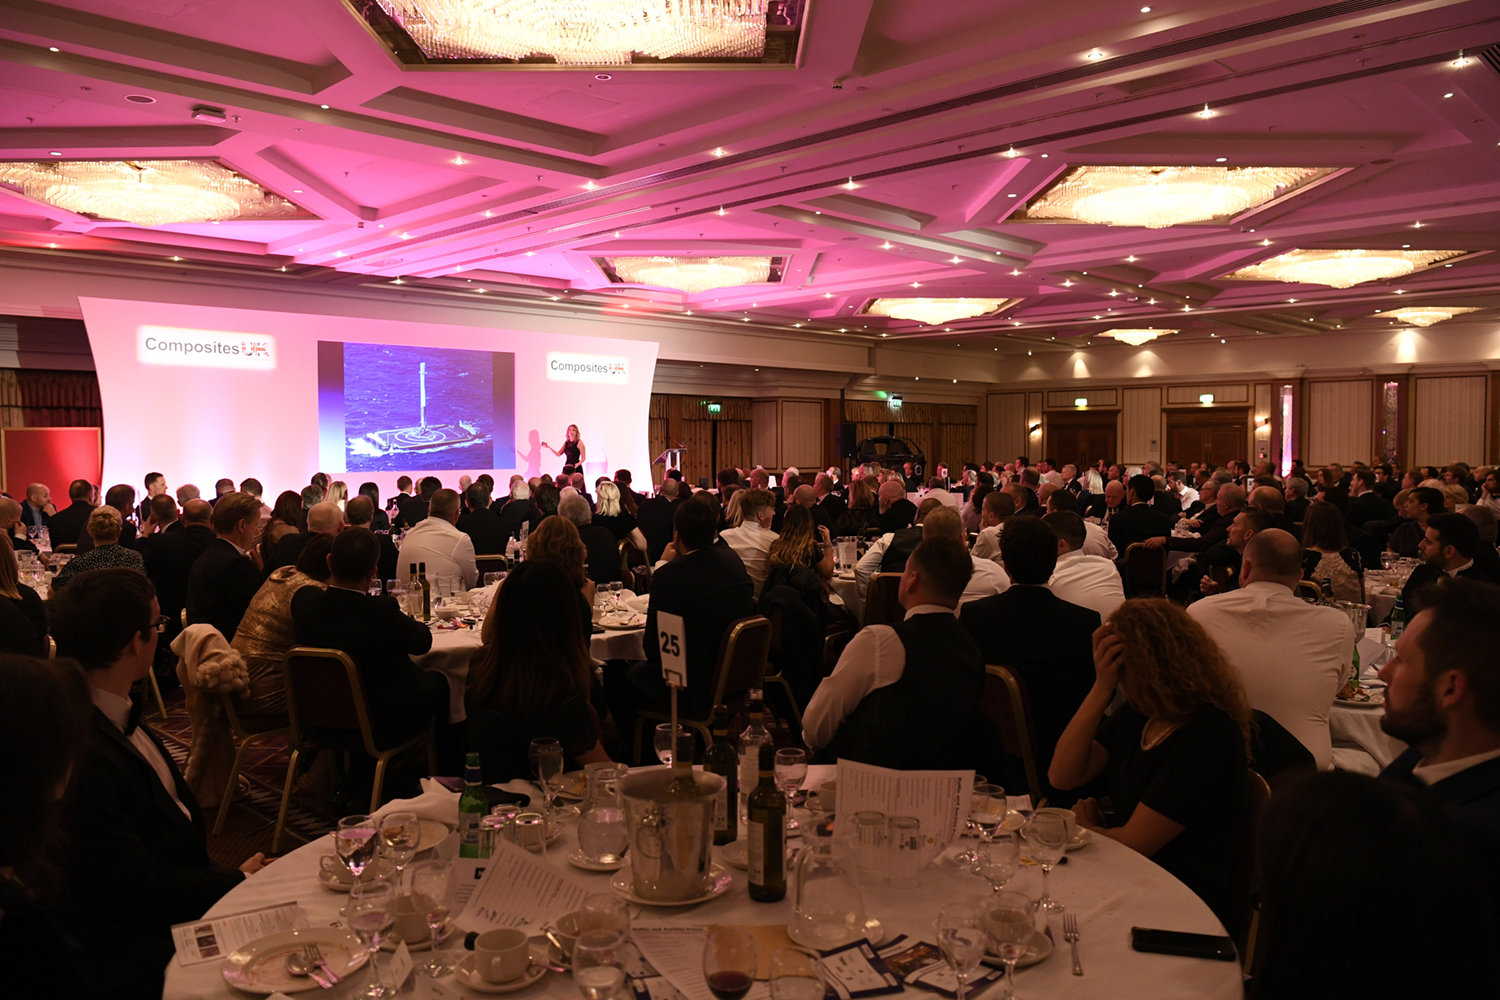 The event, held on 4 November 2020 in Birmingham, UK, celebrates innovation within the UK composites industry.